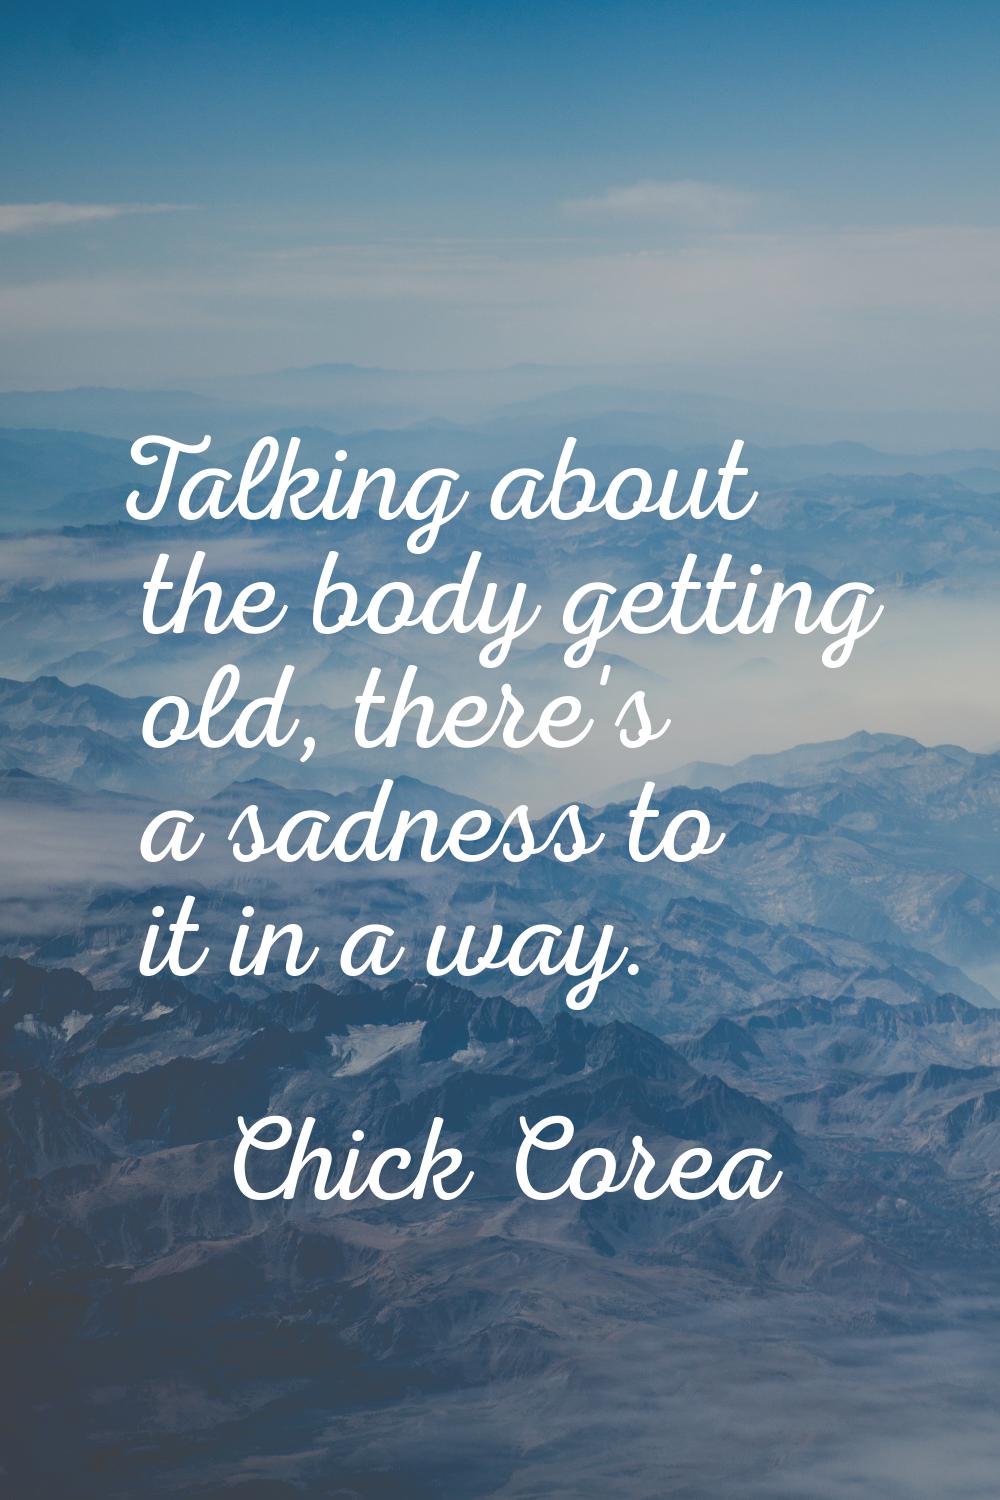 Talking about the body getting old, there's a sadness to it in a way.